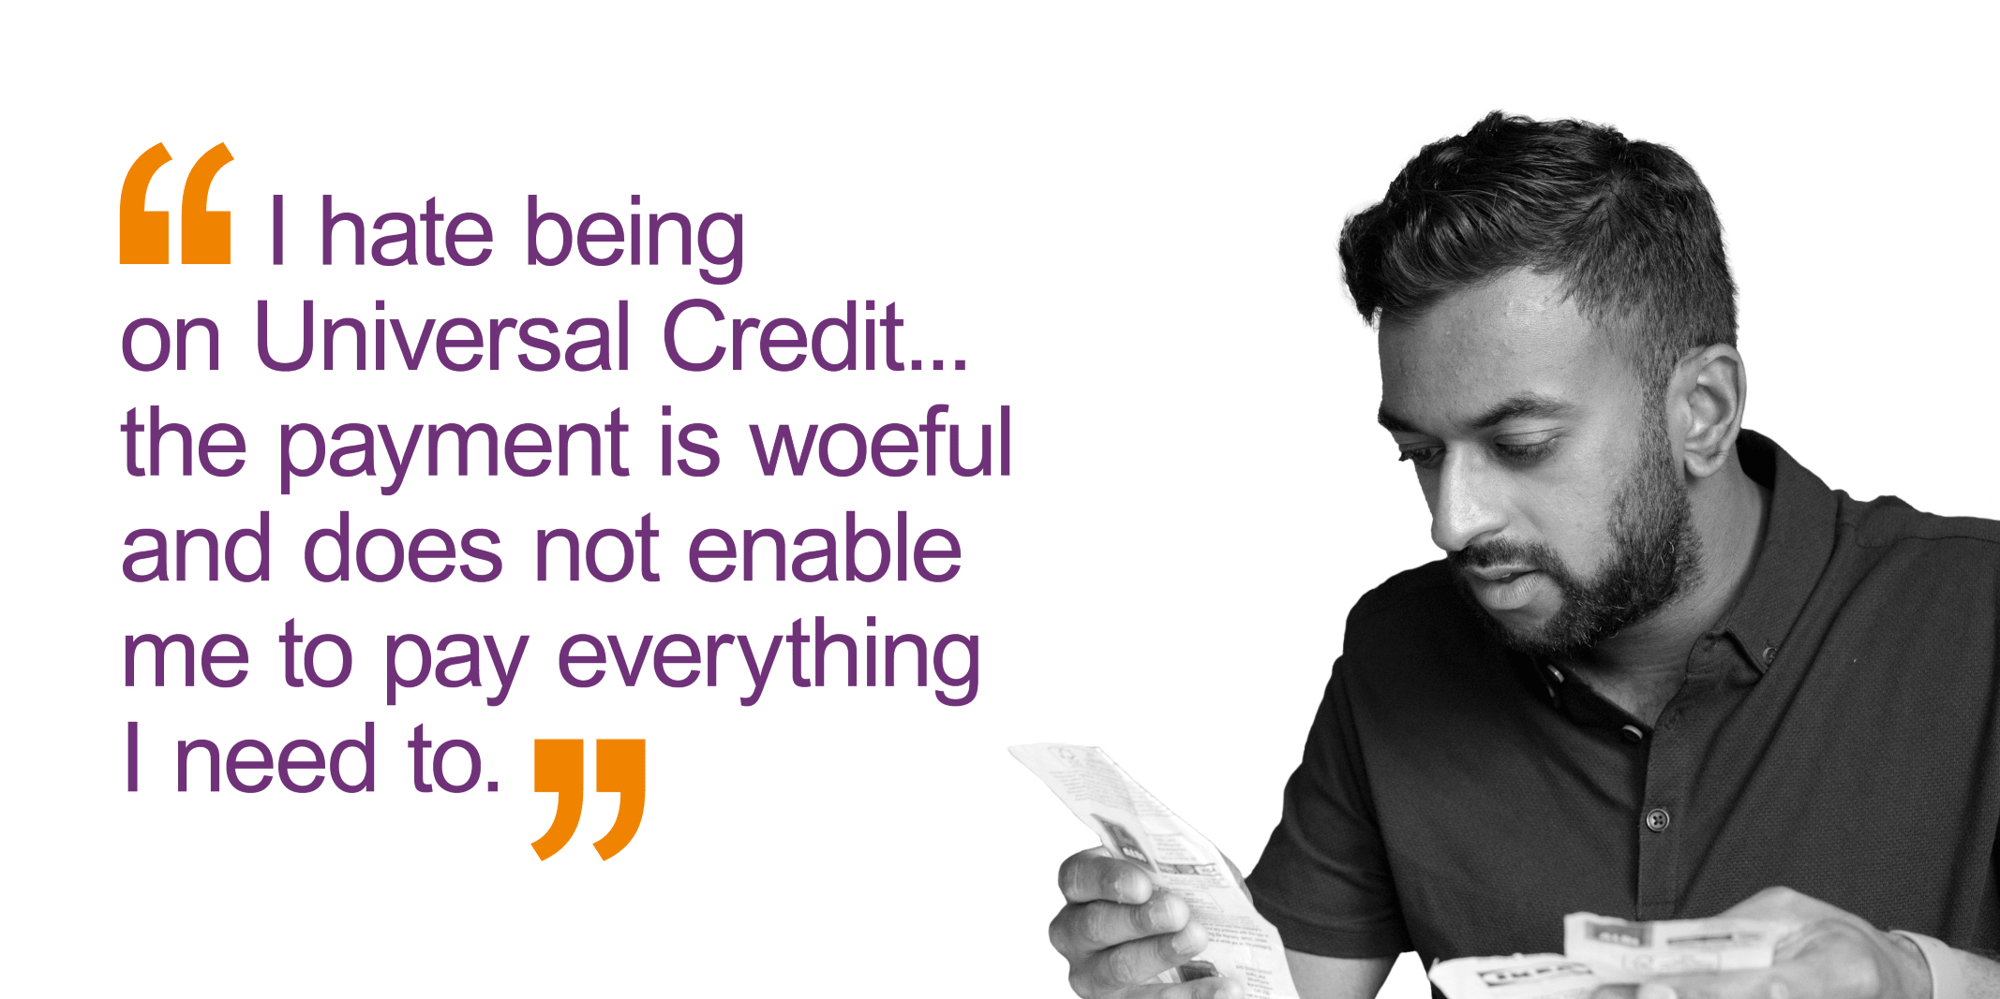 I hate being on Universal Credit, the payment is woeful and does not enable me to pay everything I need to